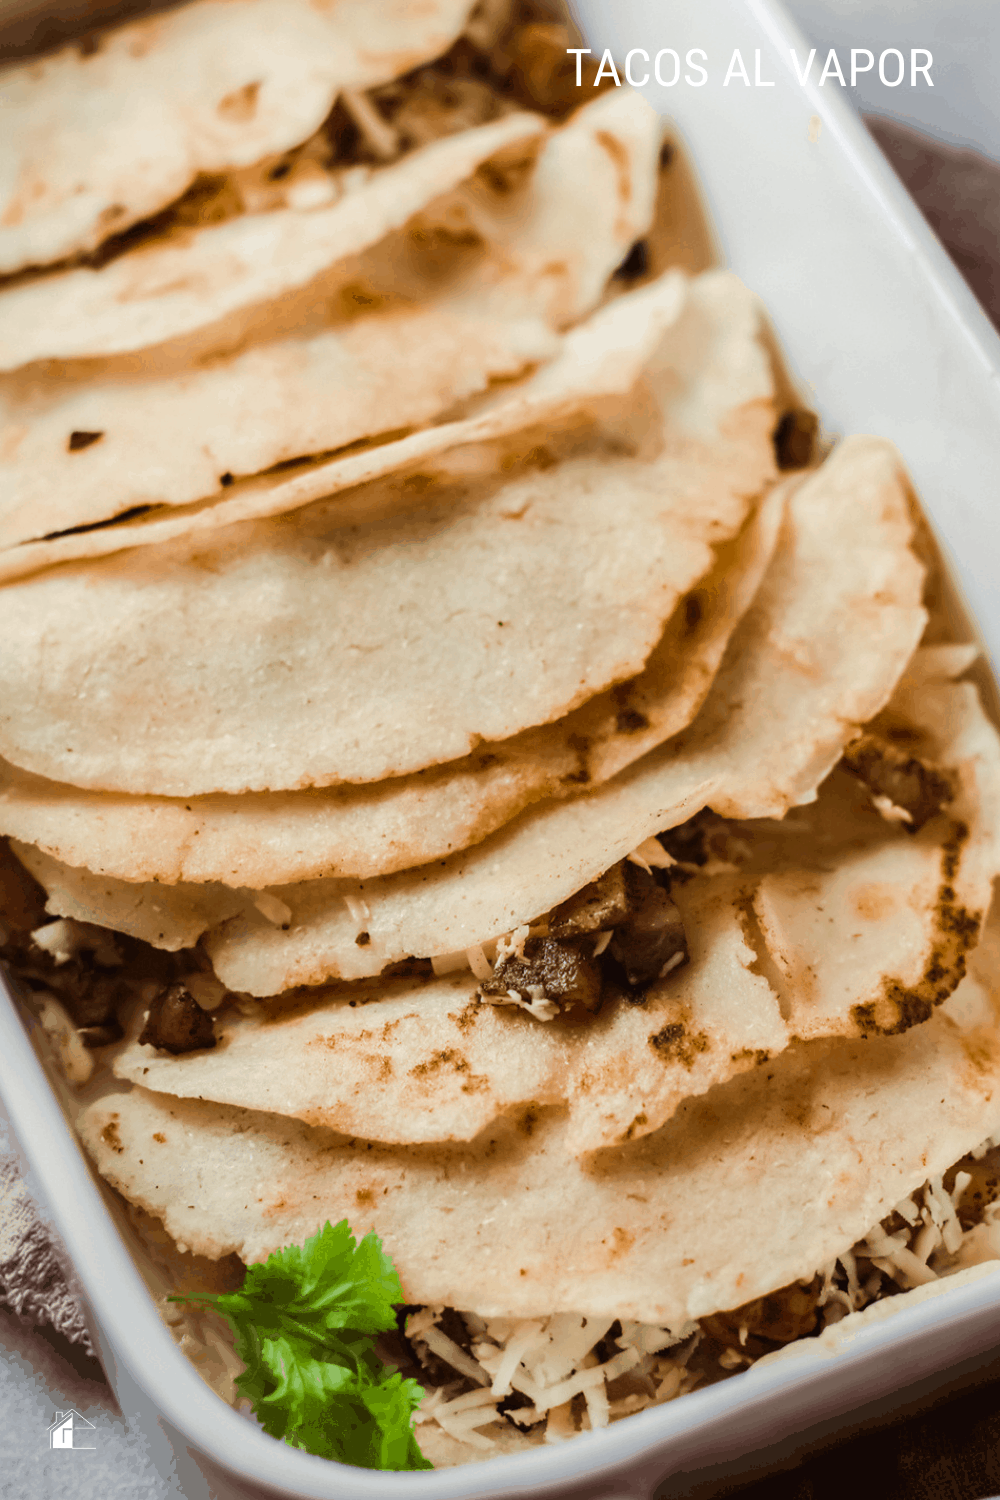 Delicious tacos al vapor or steamed tacos are popular with street vendors. Create your own version of tacos al vapor in your home. via @mystayathome